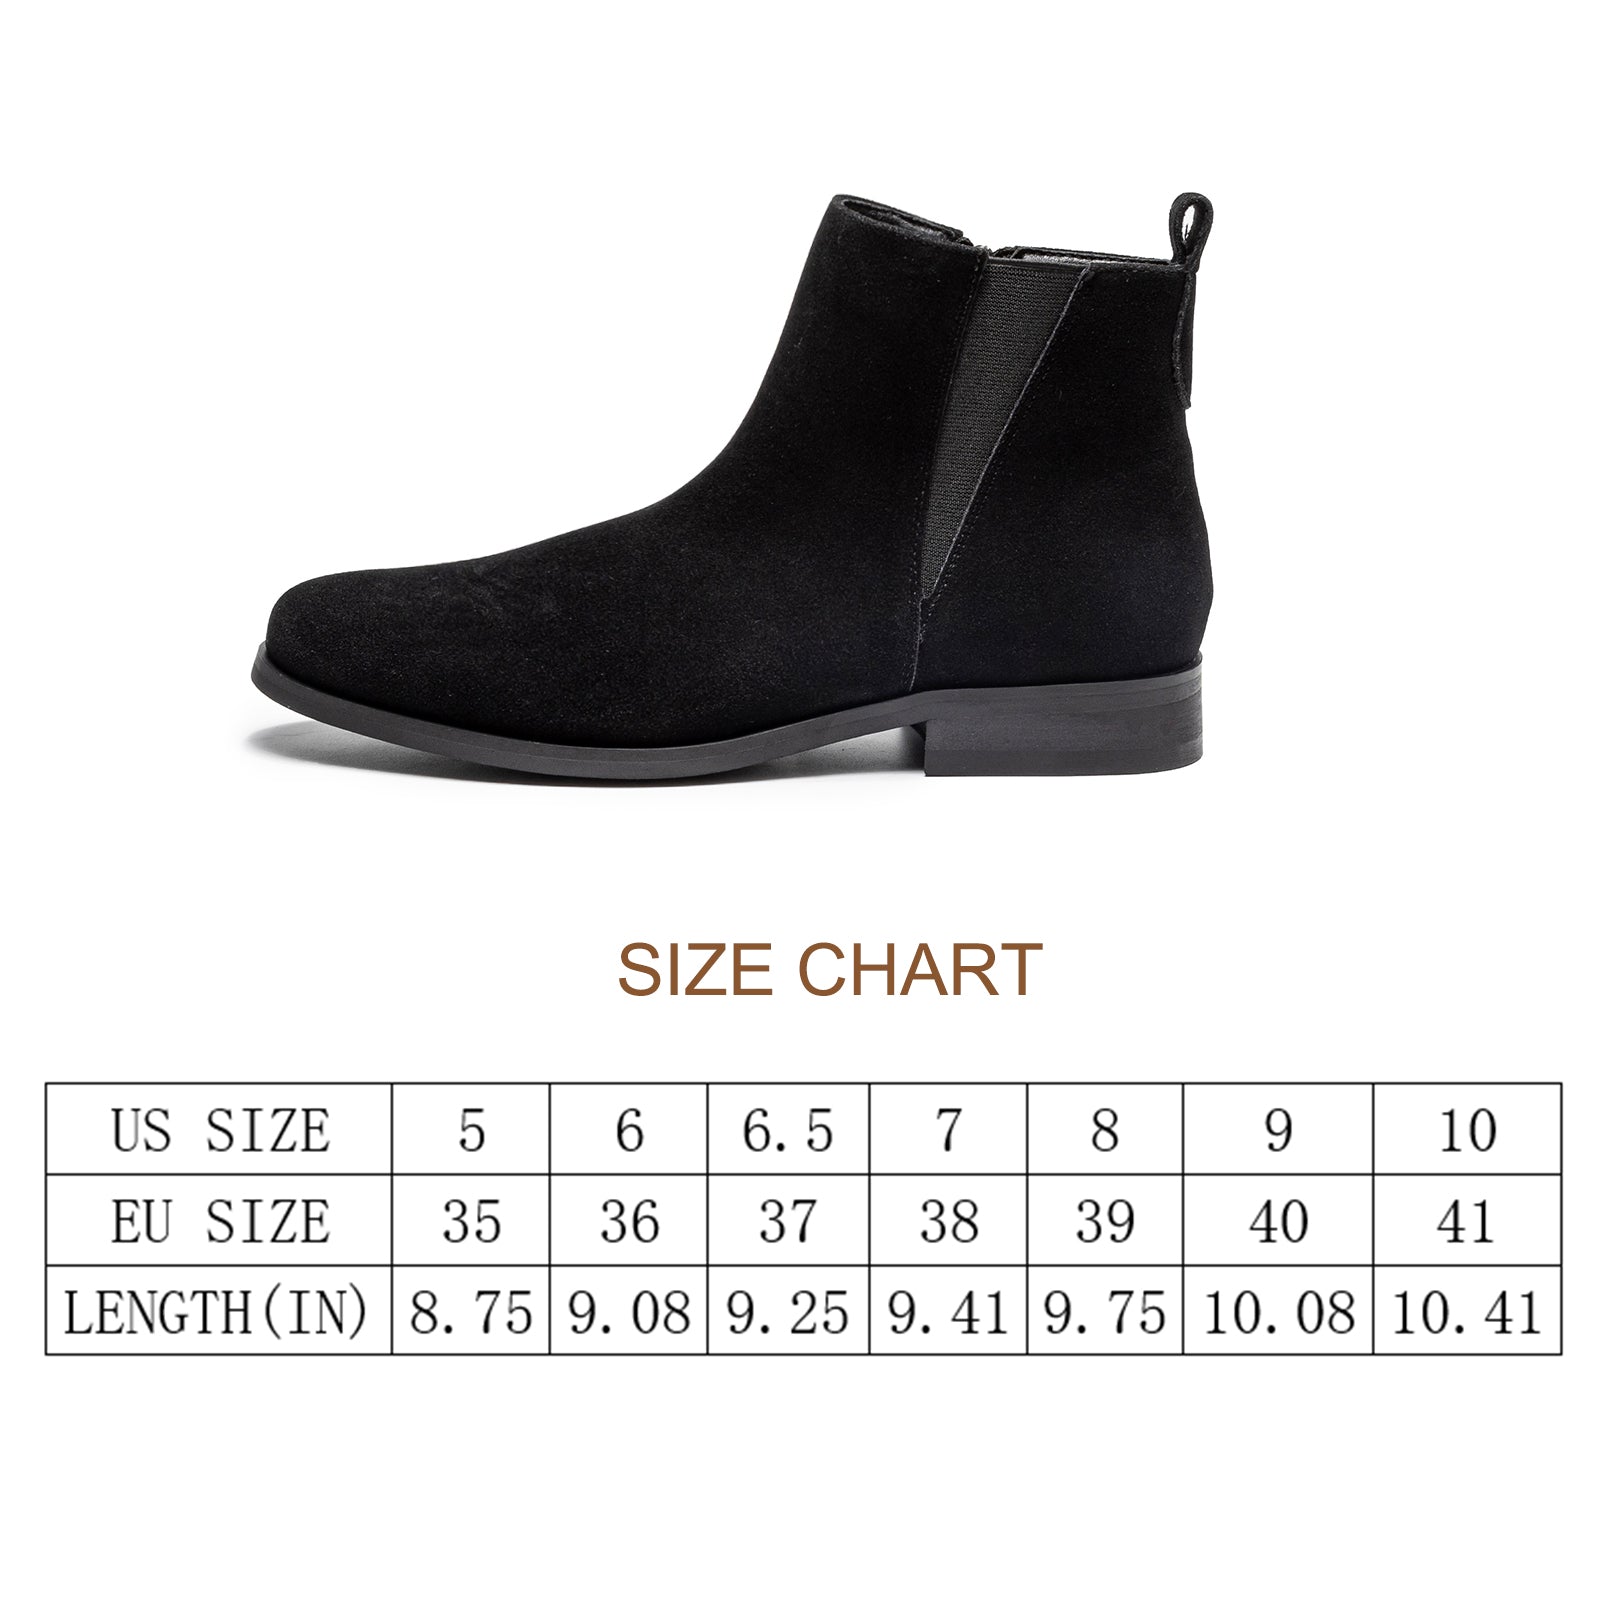 Move Aside Heeled Boot - Black | Black heel boots, Boots, Black boots